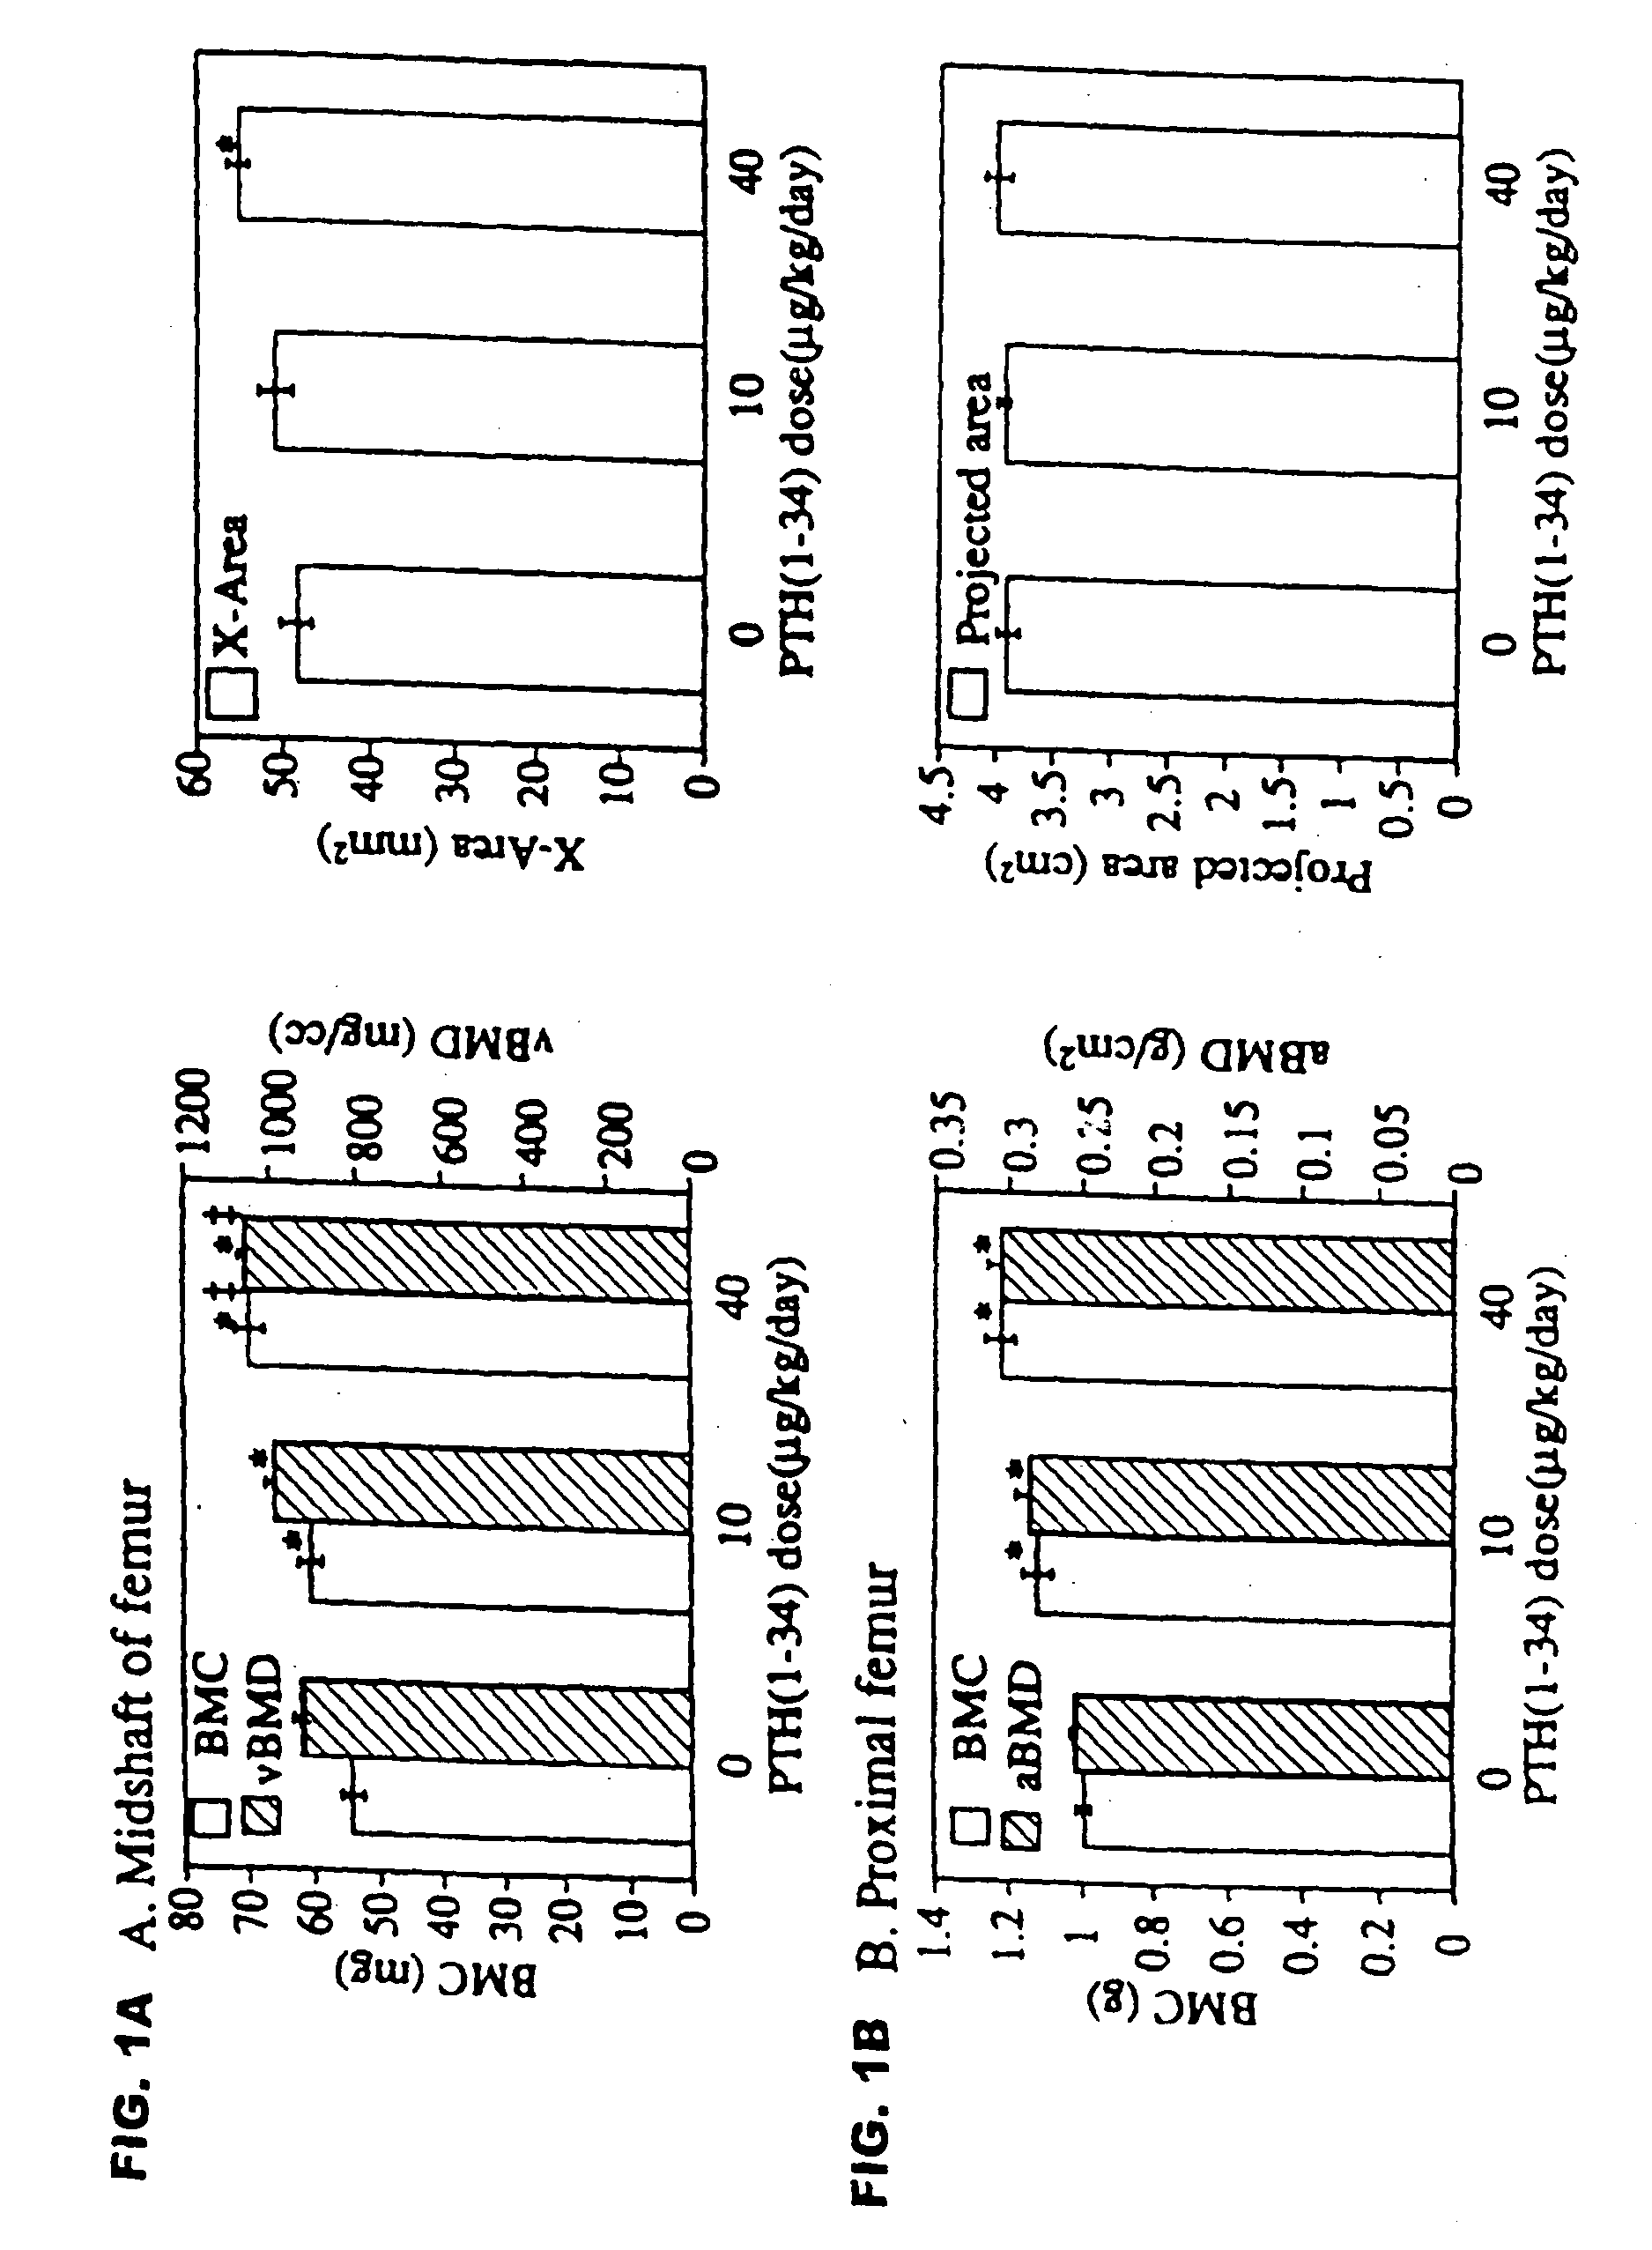 Method of increasing bone toughness and stiffness and reducing fractures